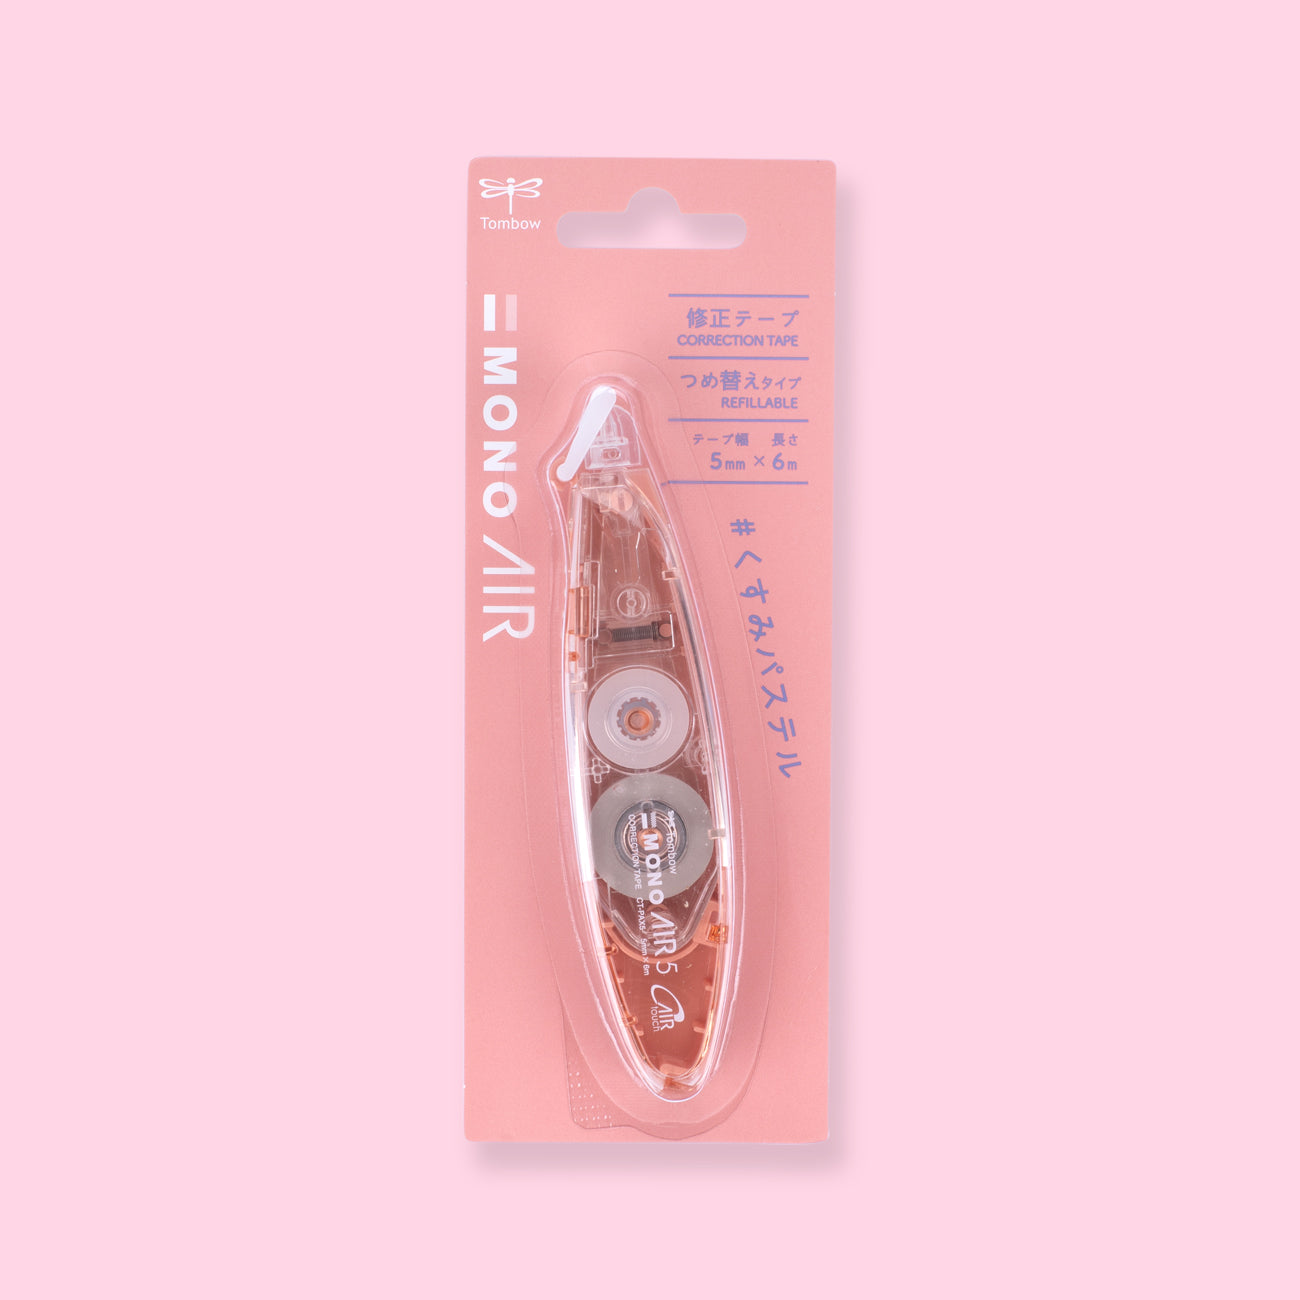 Tombow MONO Air Pen Type Correction Tape - Faded Color 2022 - Coral Red